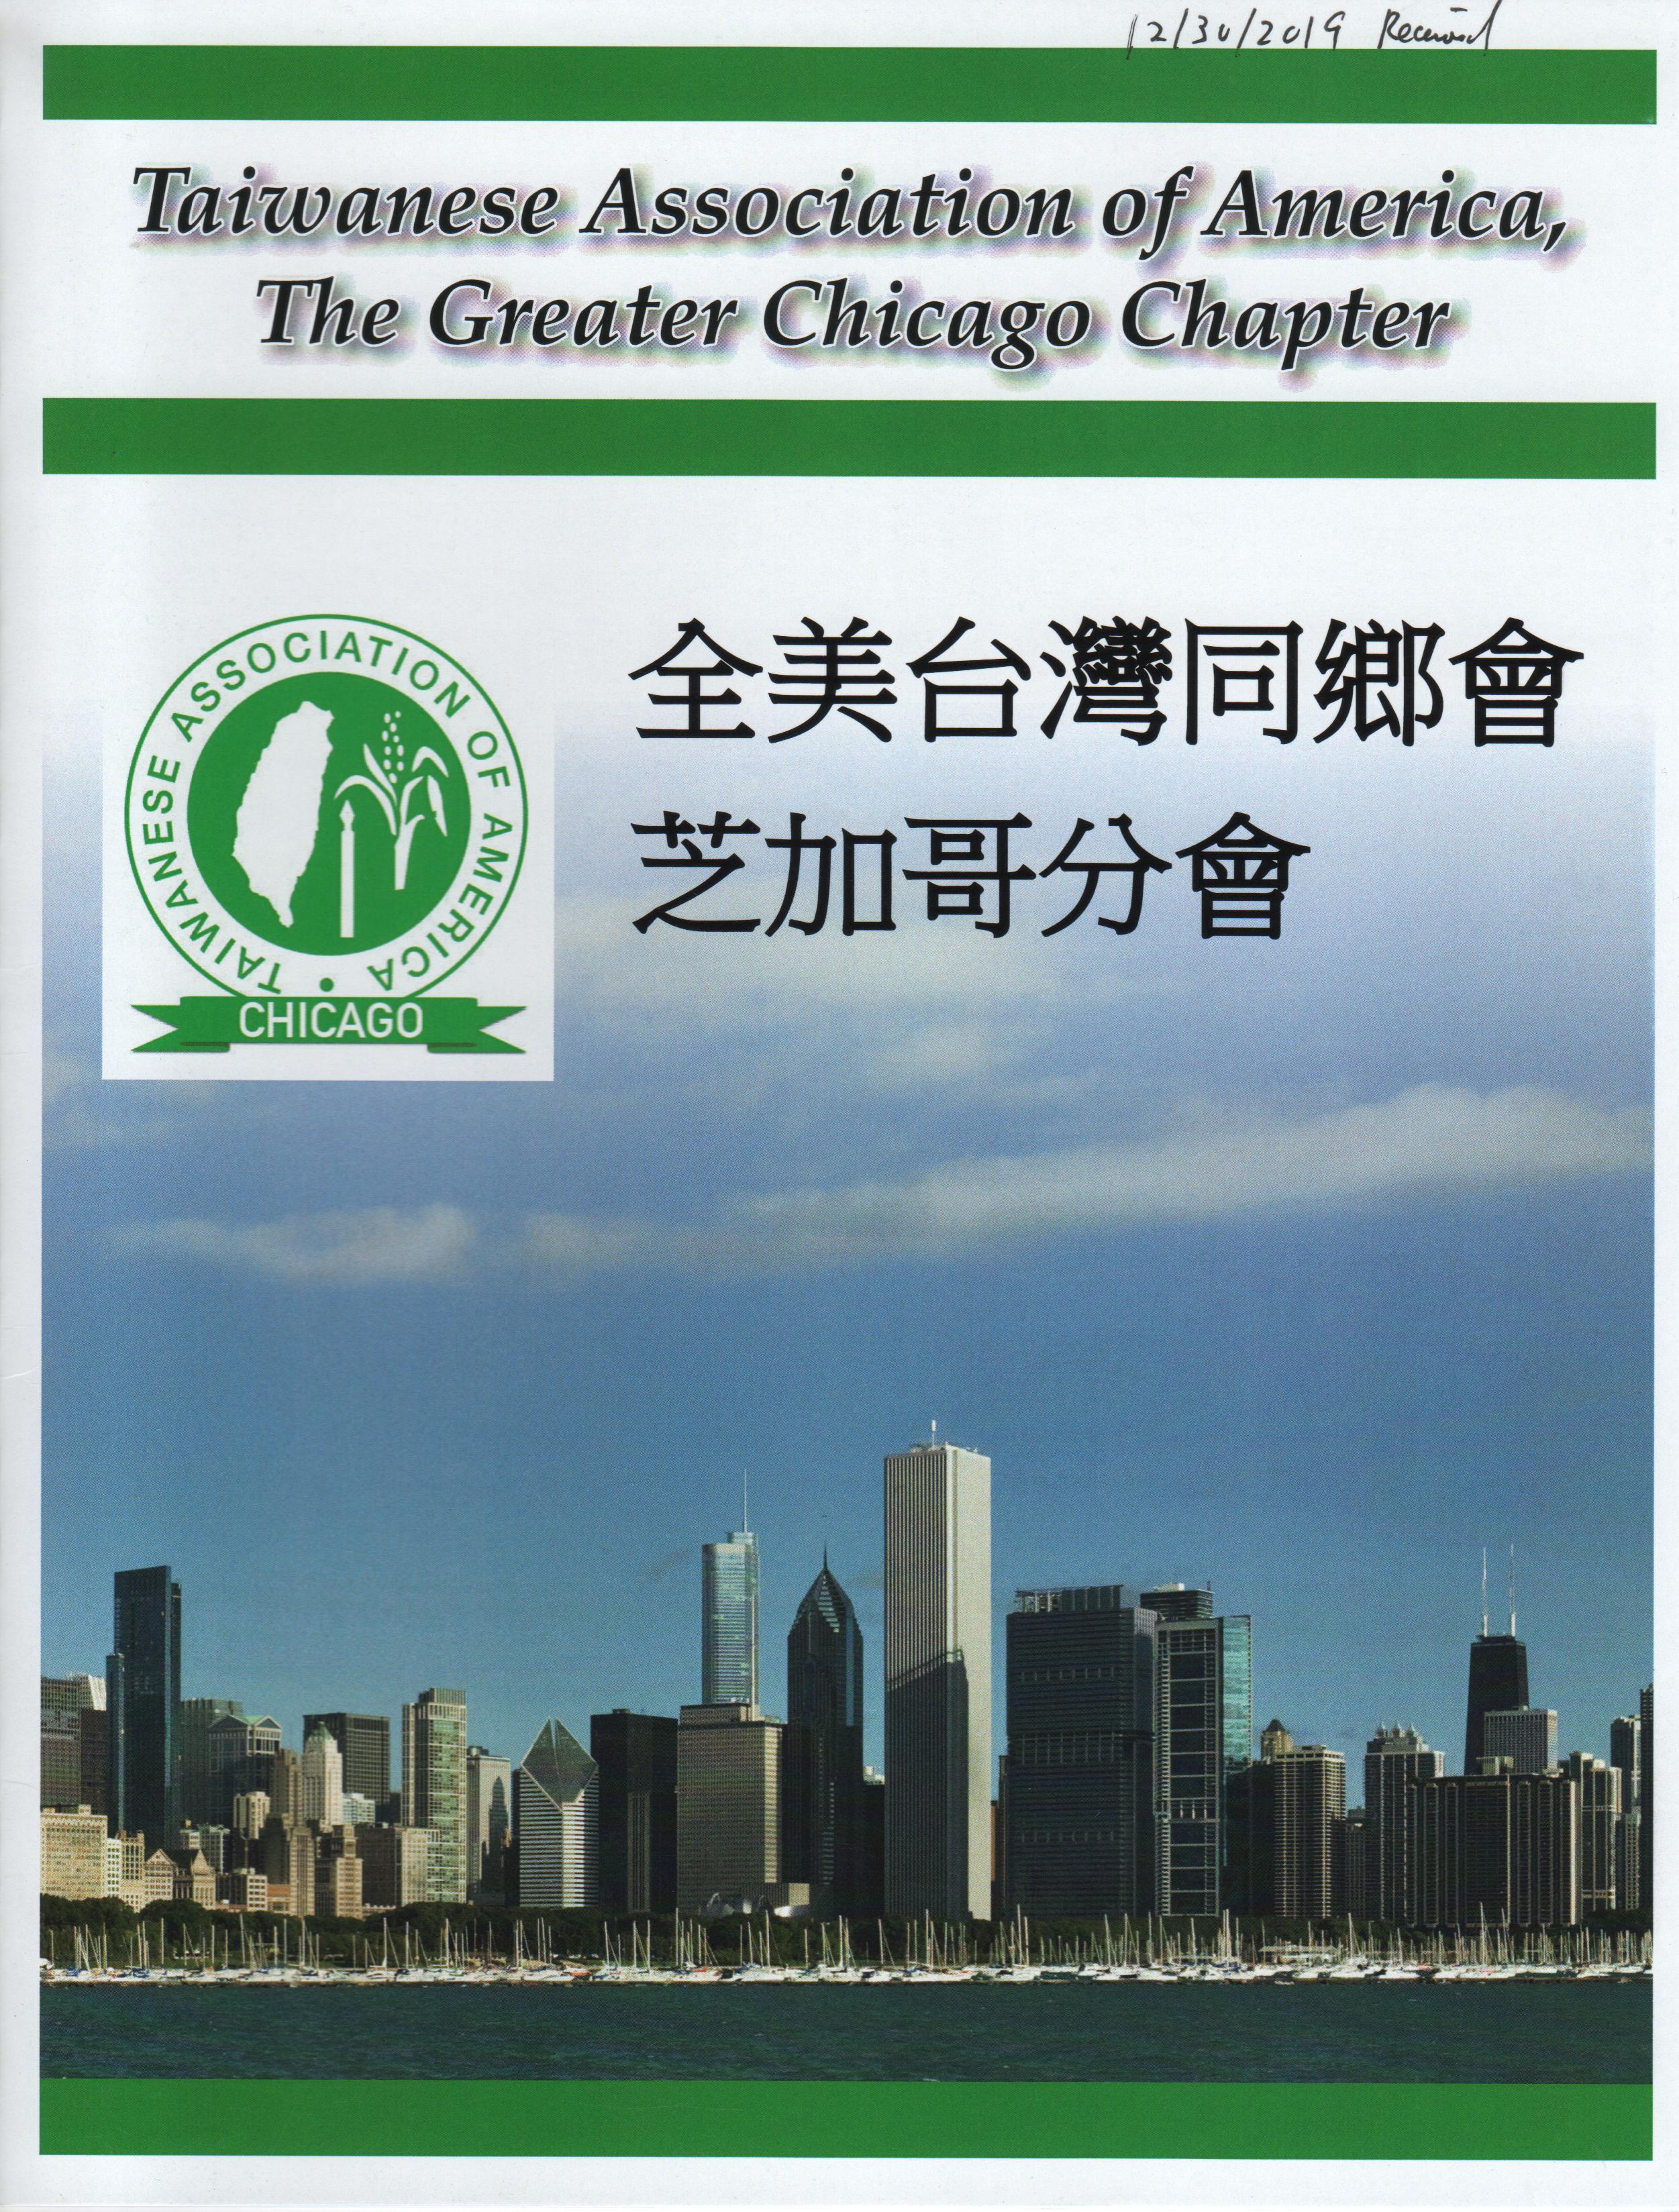 1331. Member Directory of Taiwanese Association of America, The Greater Chicago Chapter 全美台灣同鄉會芝加哥分會 / TAA-Chicago /12/2019/Magazines/雜誌